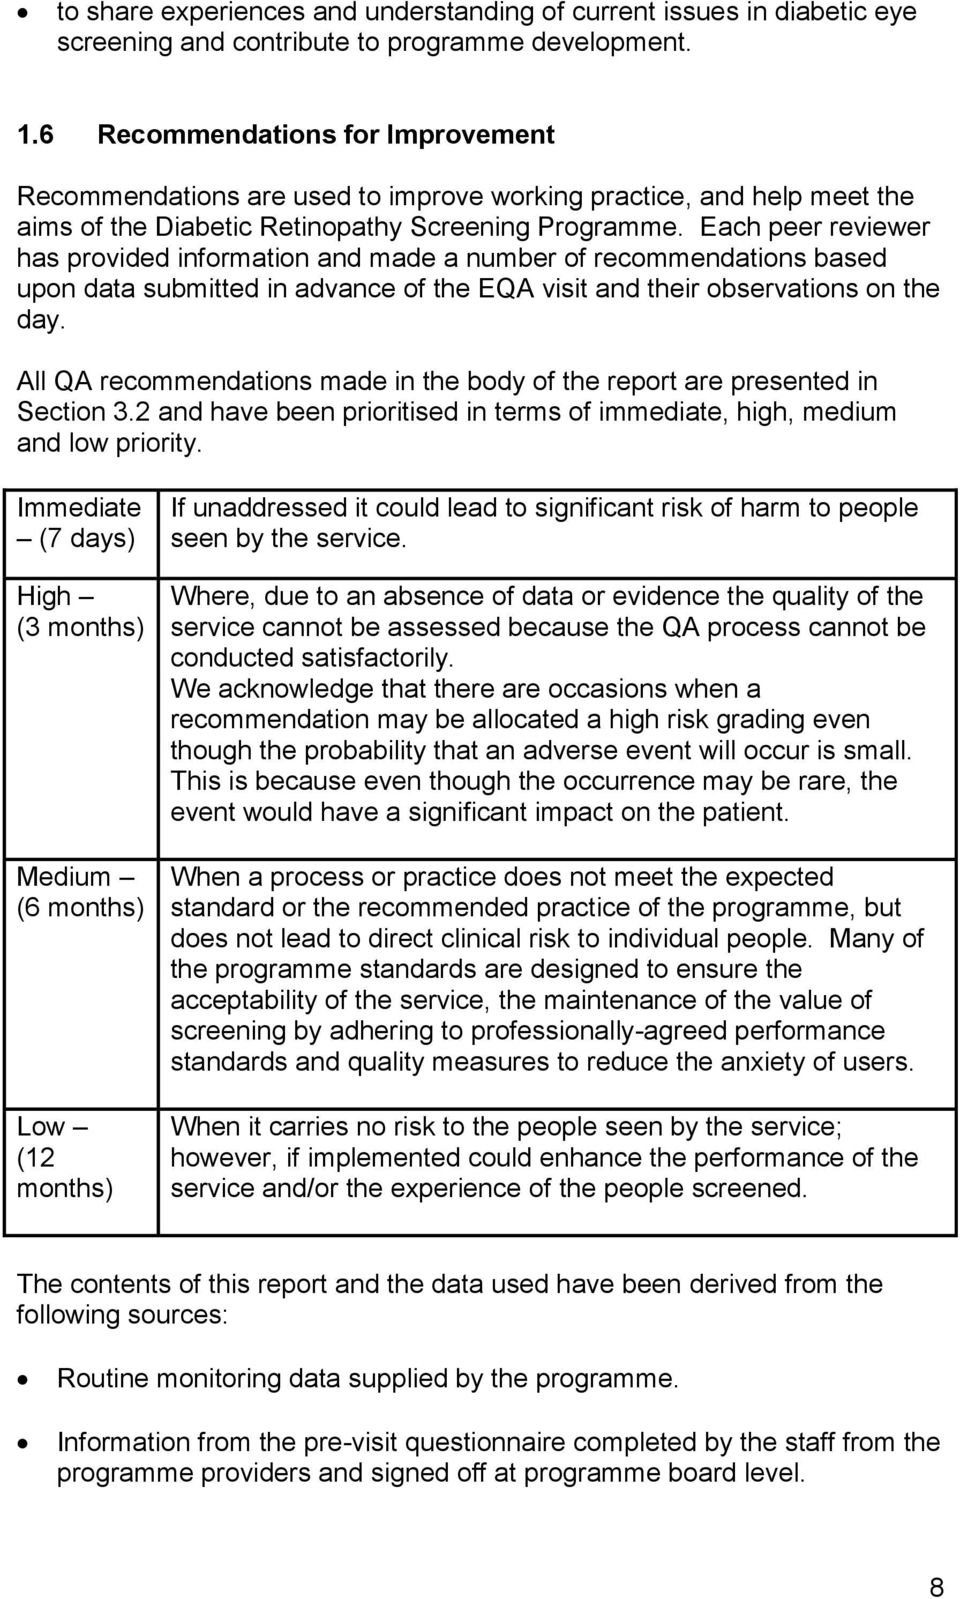 Each peer reviewer has provided information and made a number of recommendations based upon data submitted in advance of the EQA visit and their observations on the day.